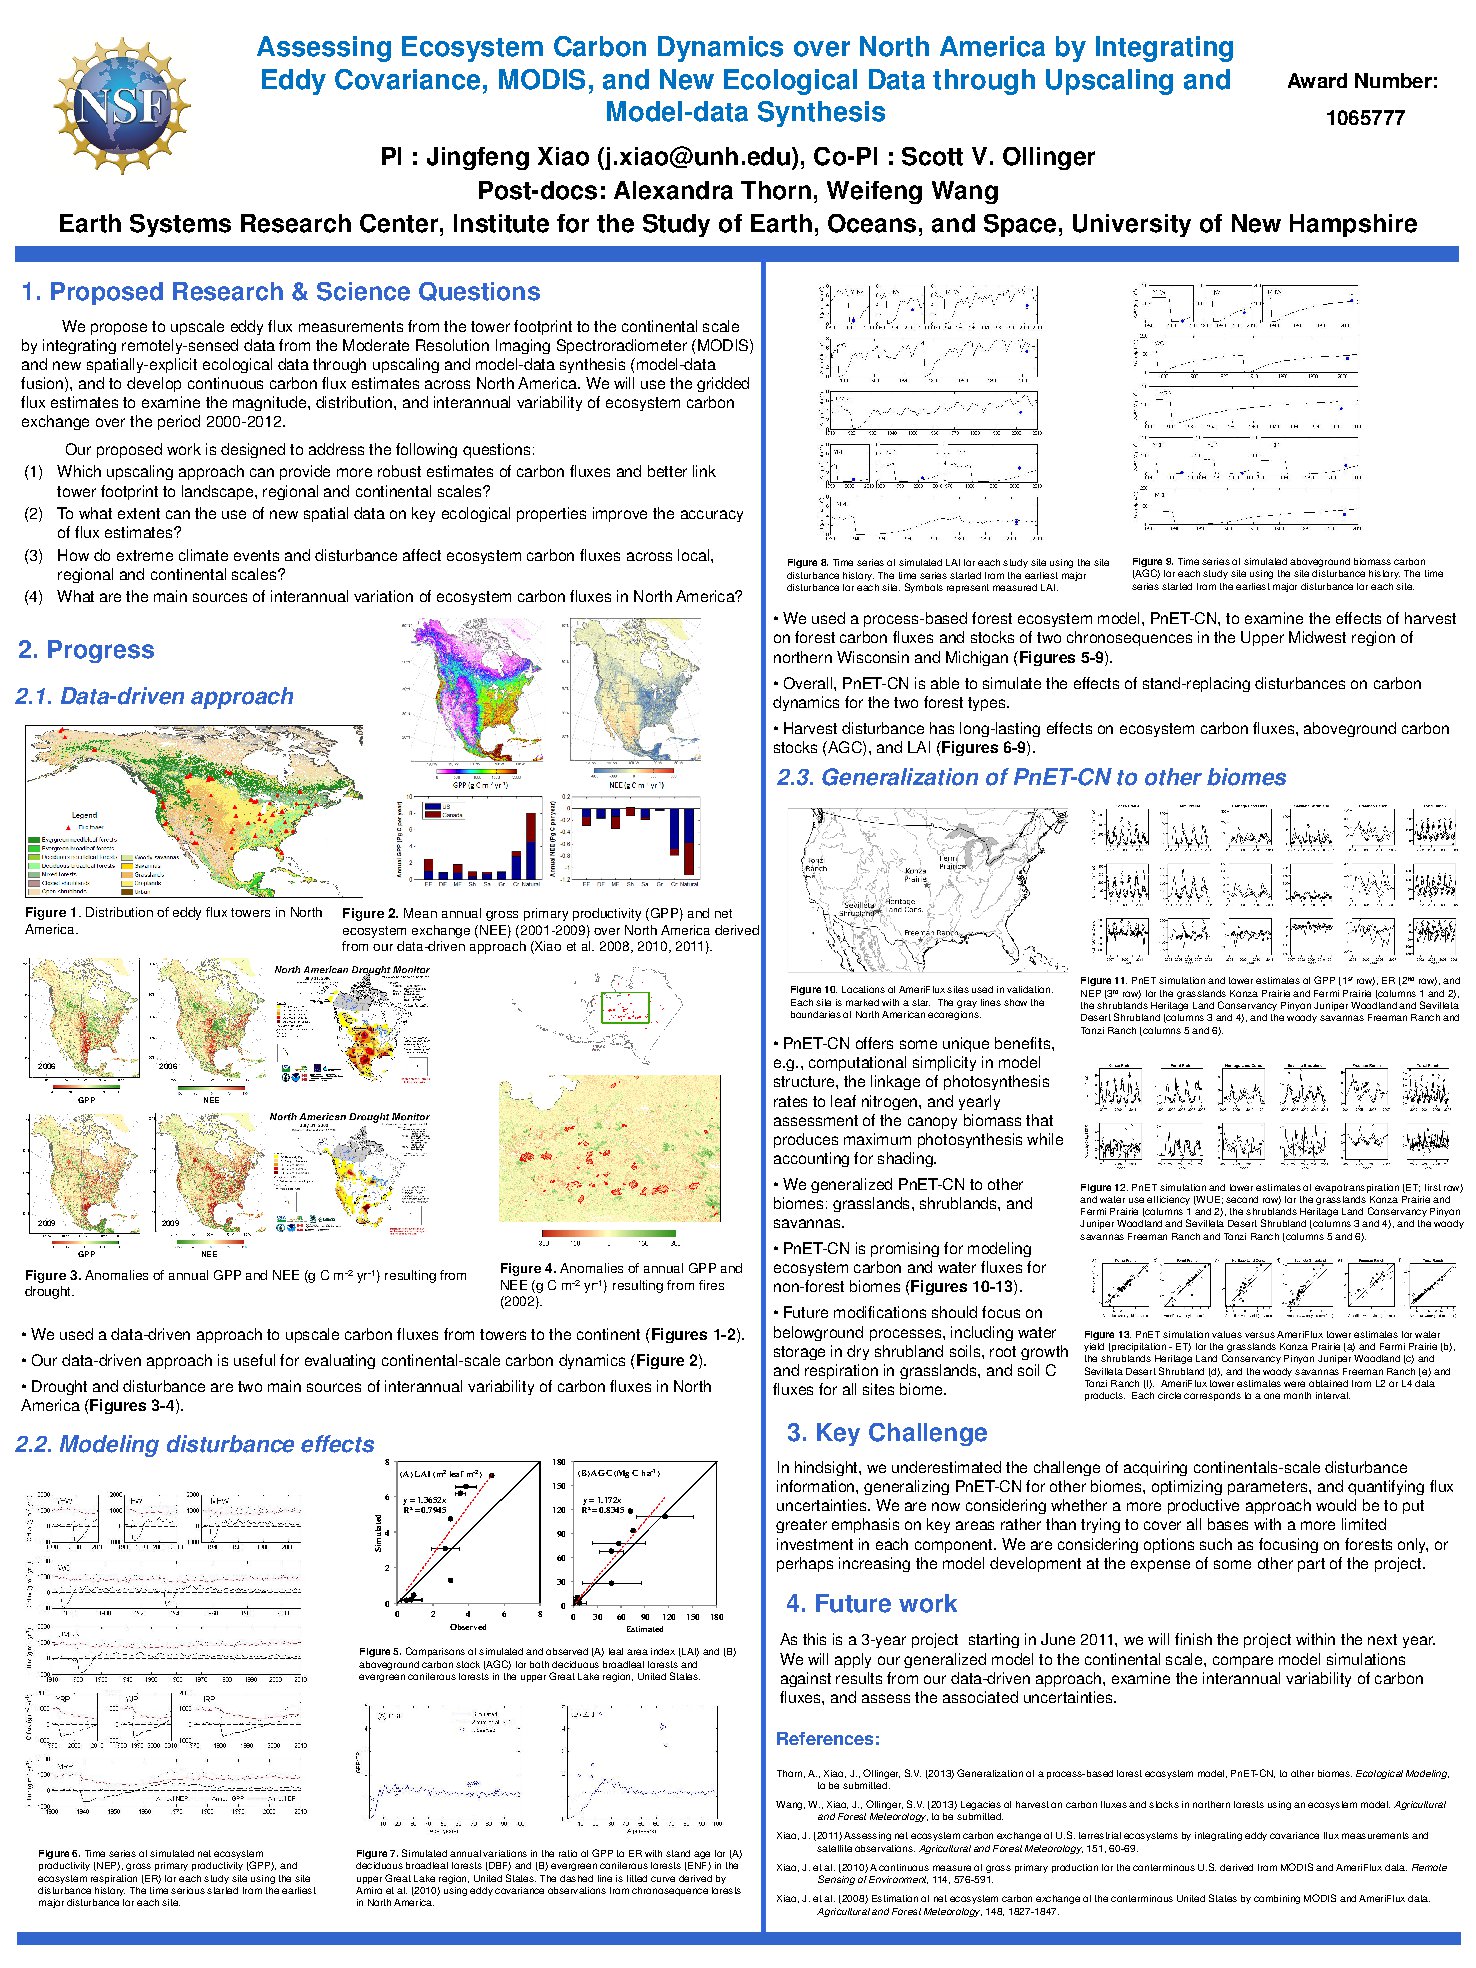 Assessing Ecosystem Carbon Dynamics Over North America By Integrating Eddy Covariance, Modis, And New Ecological Data Through Upscaling And Model-Data Synthesis by jfxiao